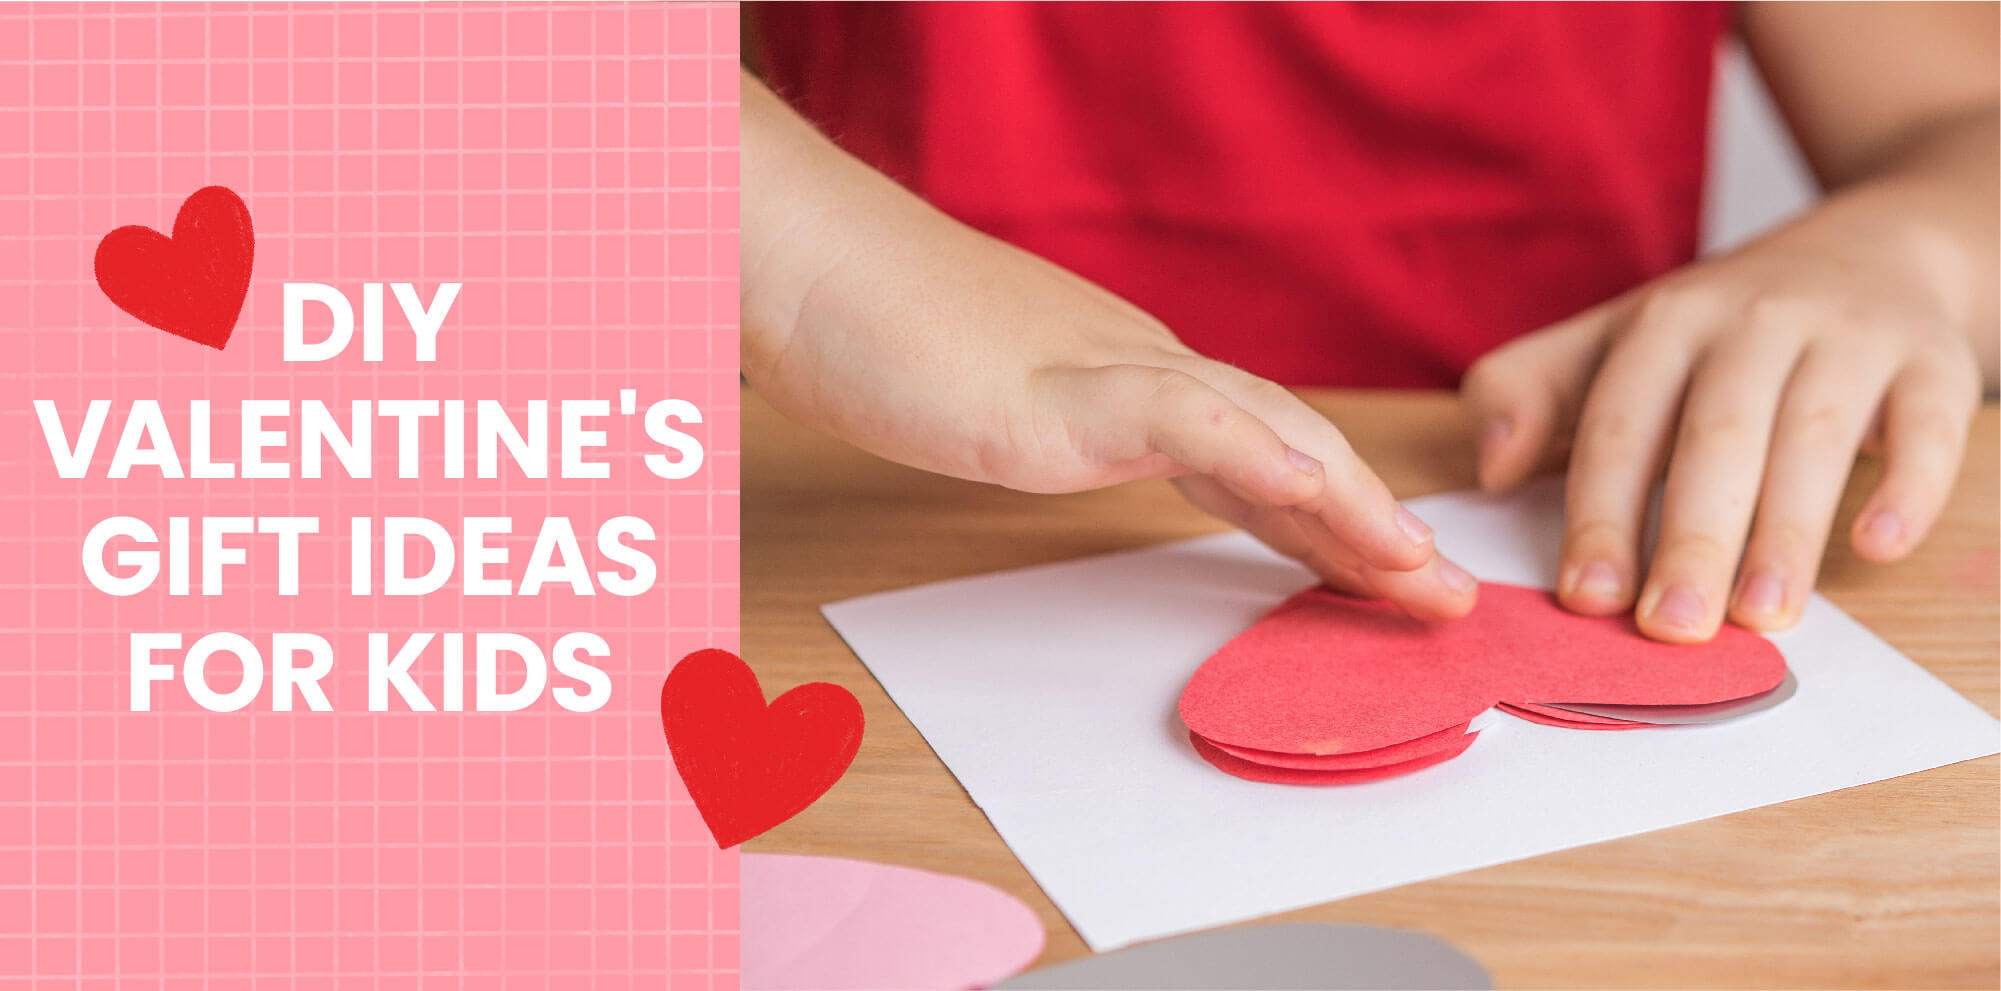 A DIY Valentine's Day Craft That's Easy & So Cute - The Mom Edit